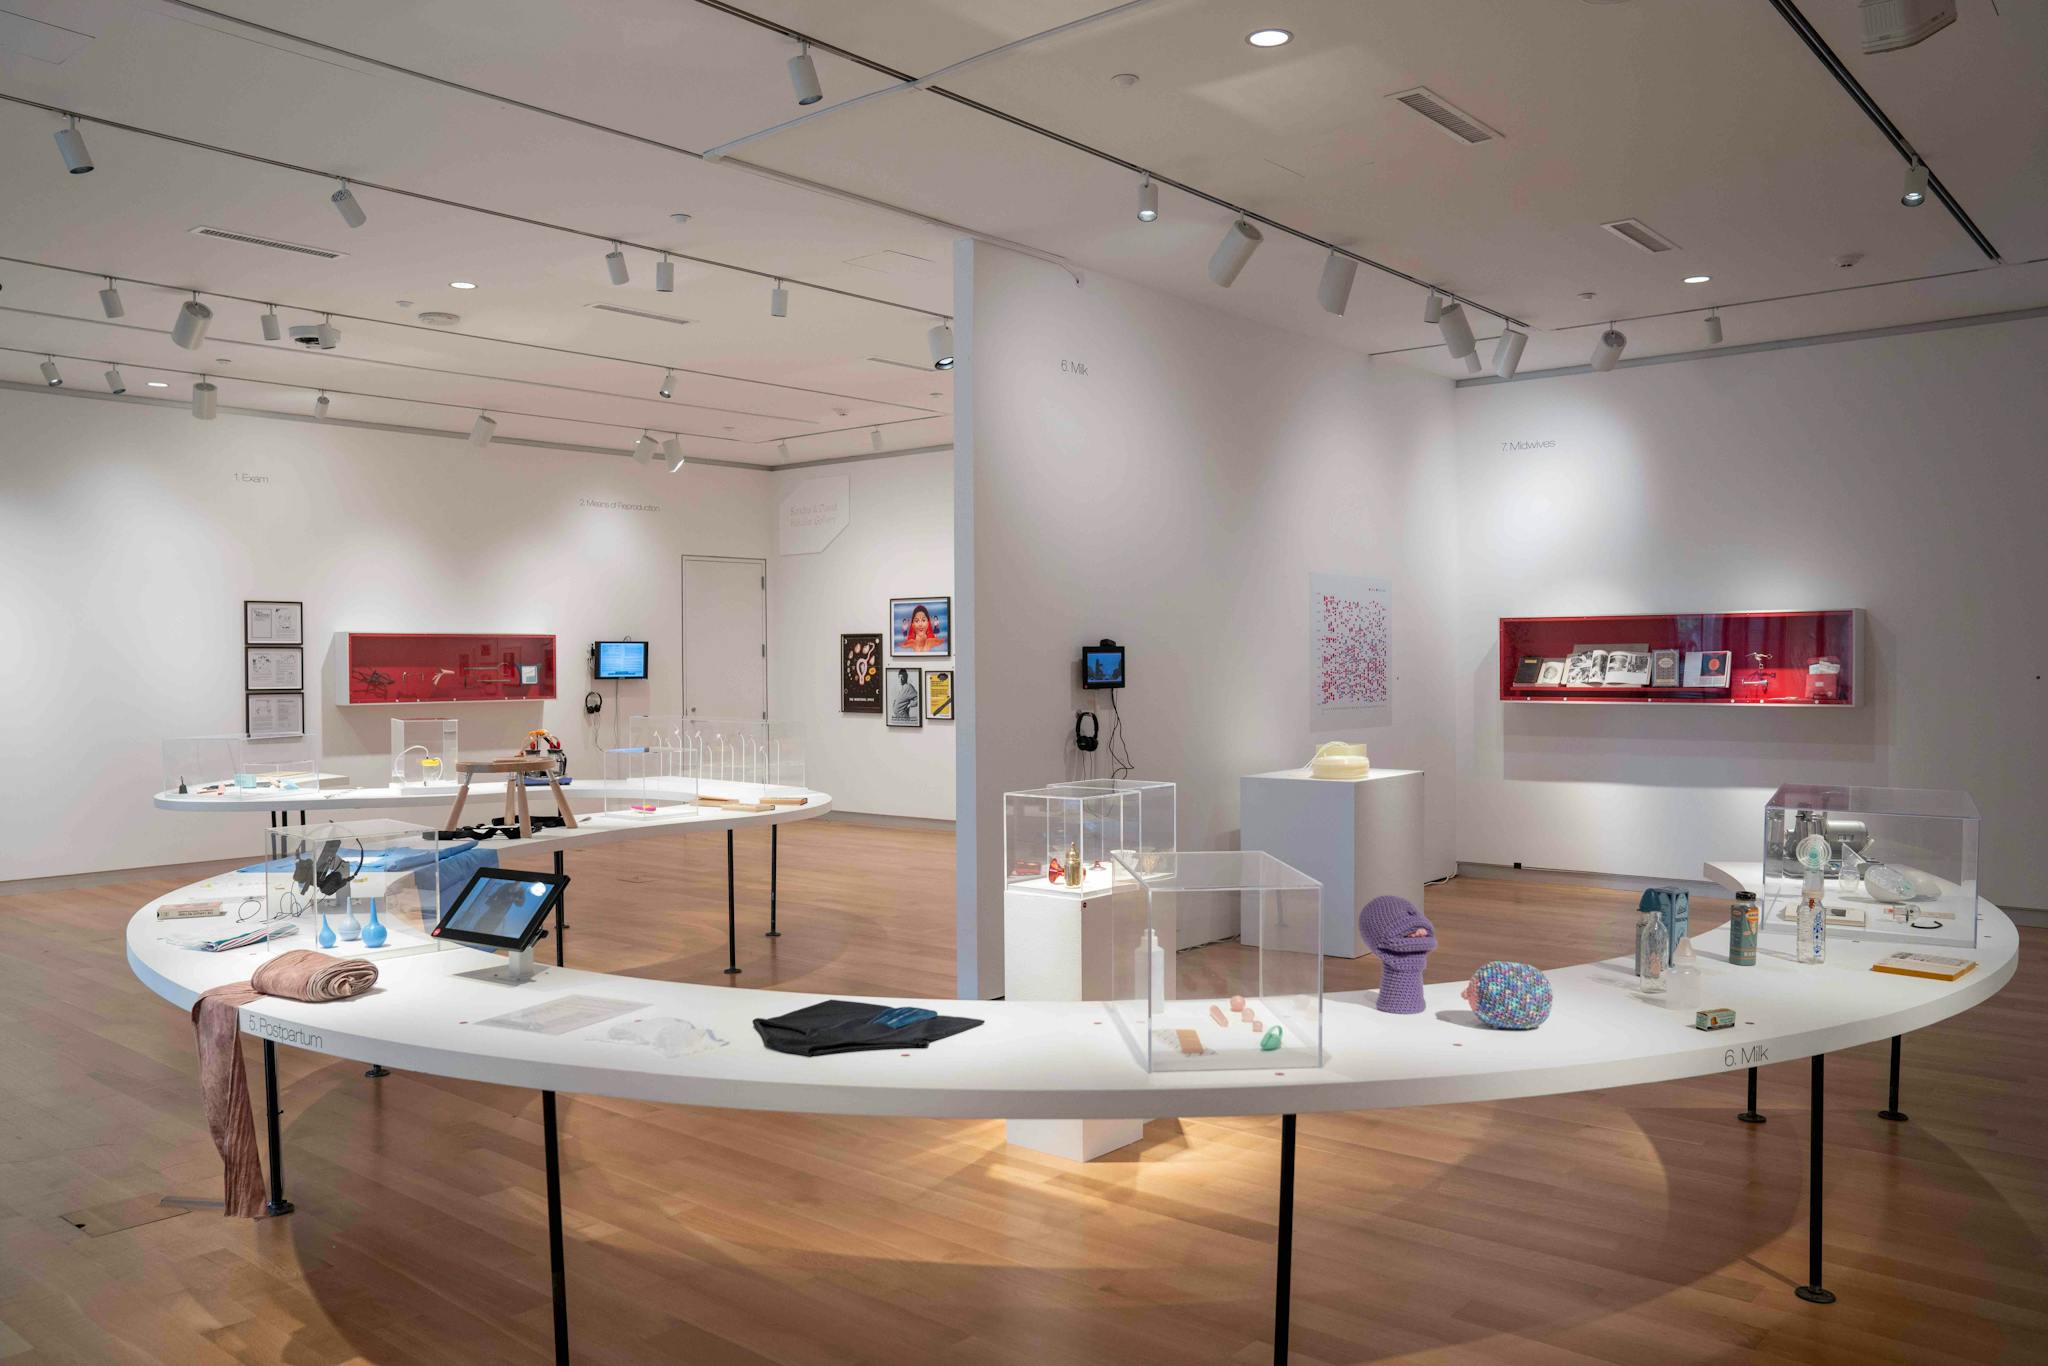 Objects relating to motherhood on display on a white curving table and positioned against the walls of the gallery.